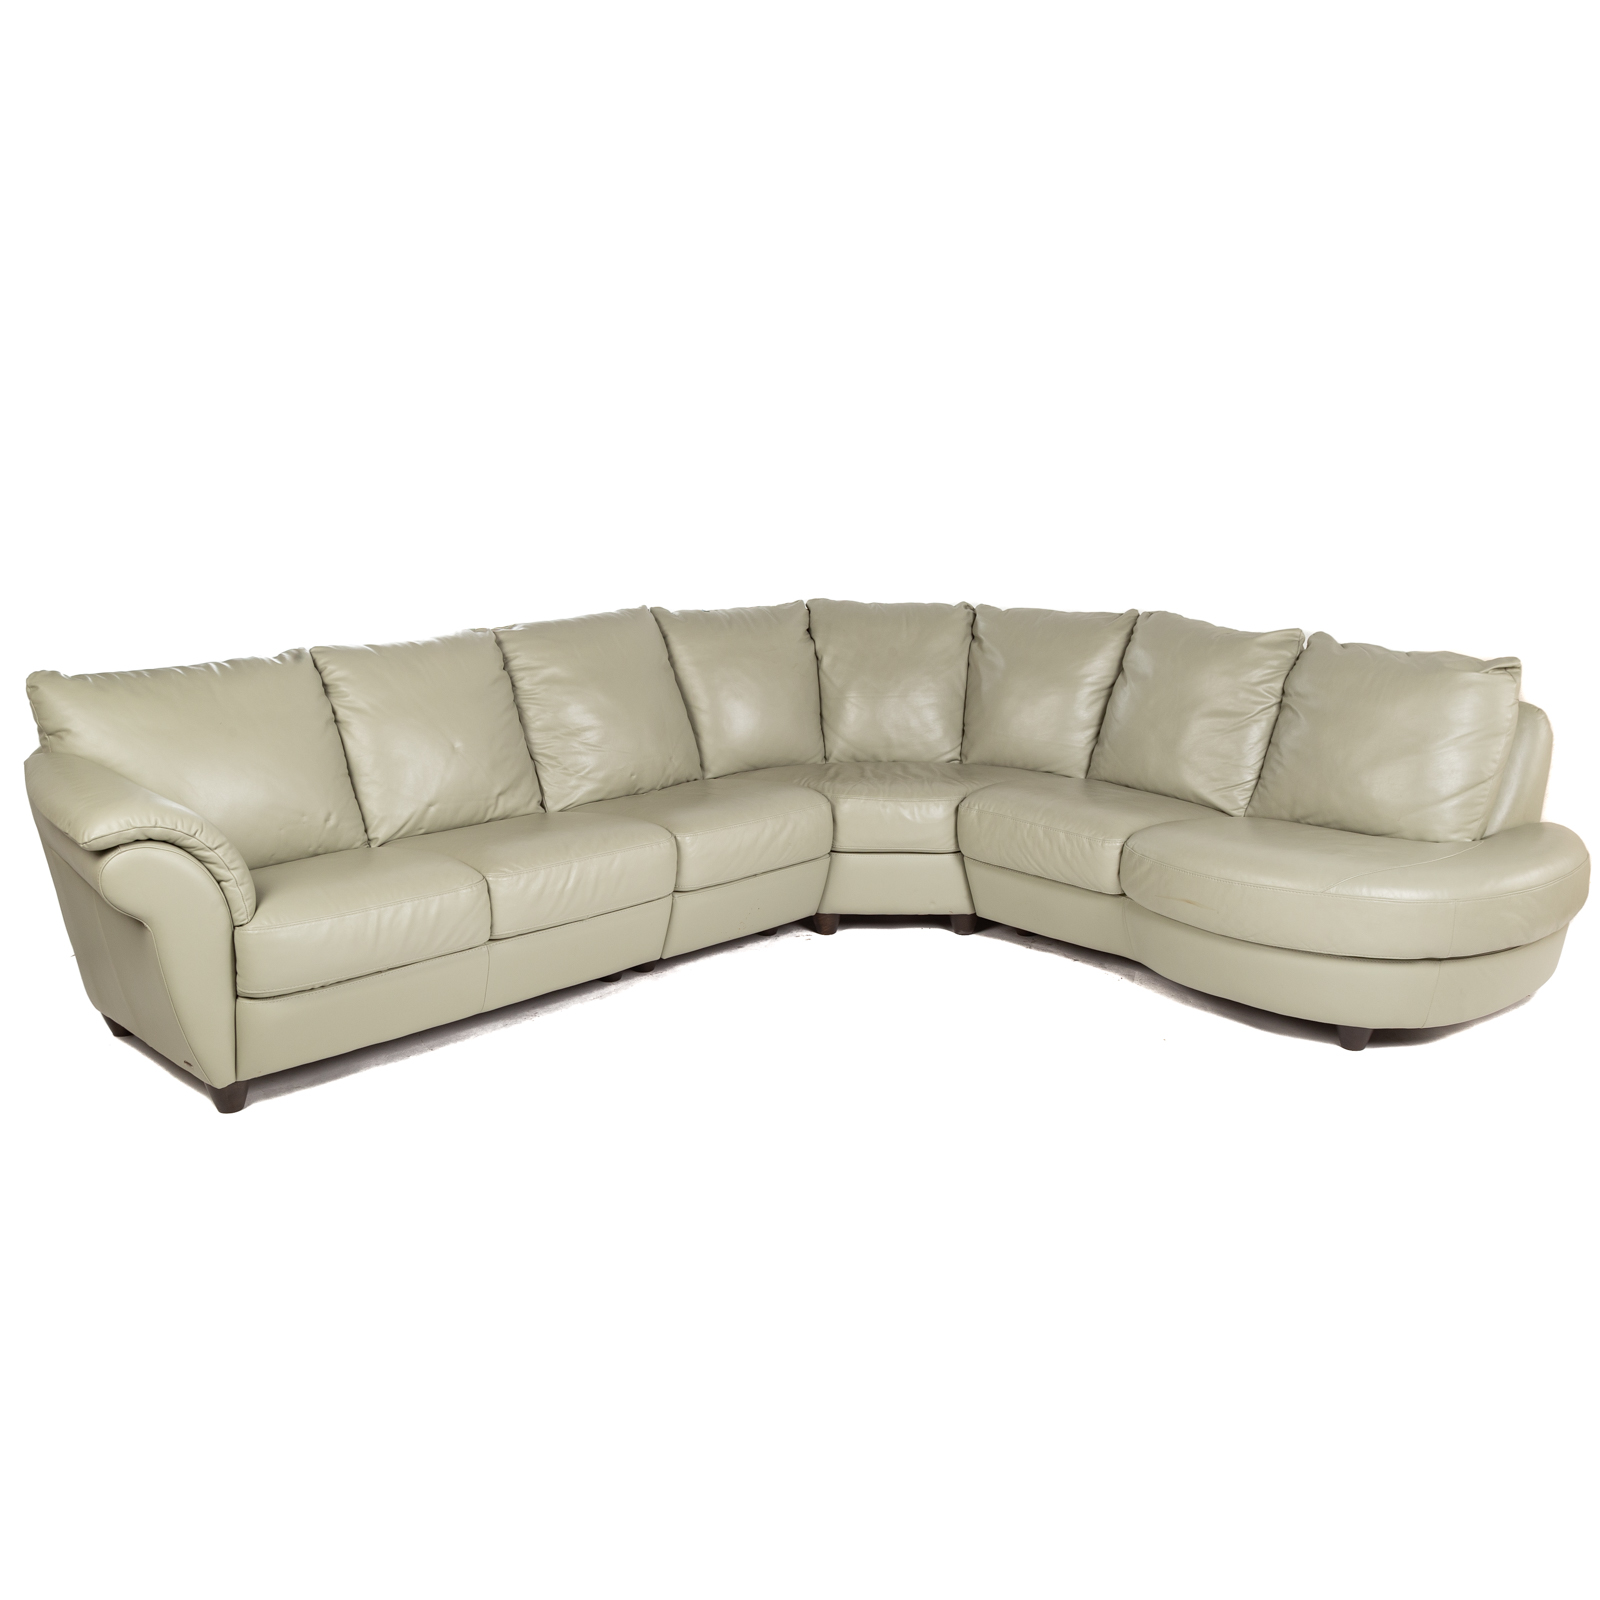 NATUZZI CONTEMPORARY LEATHER SECTIONAL